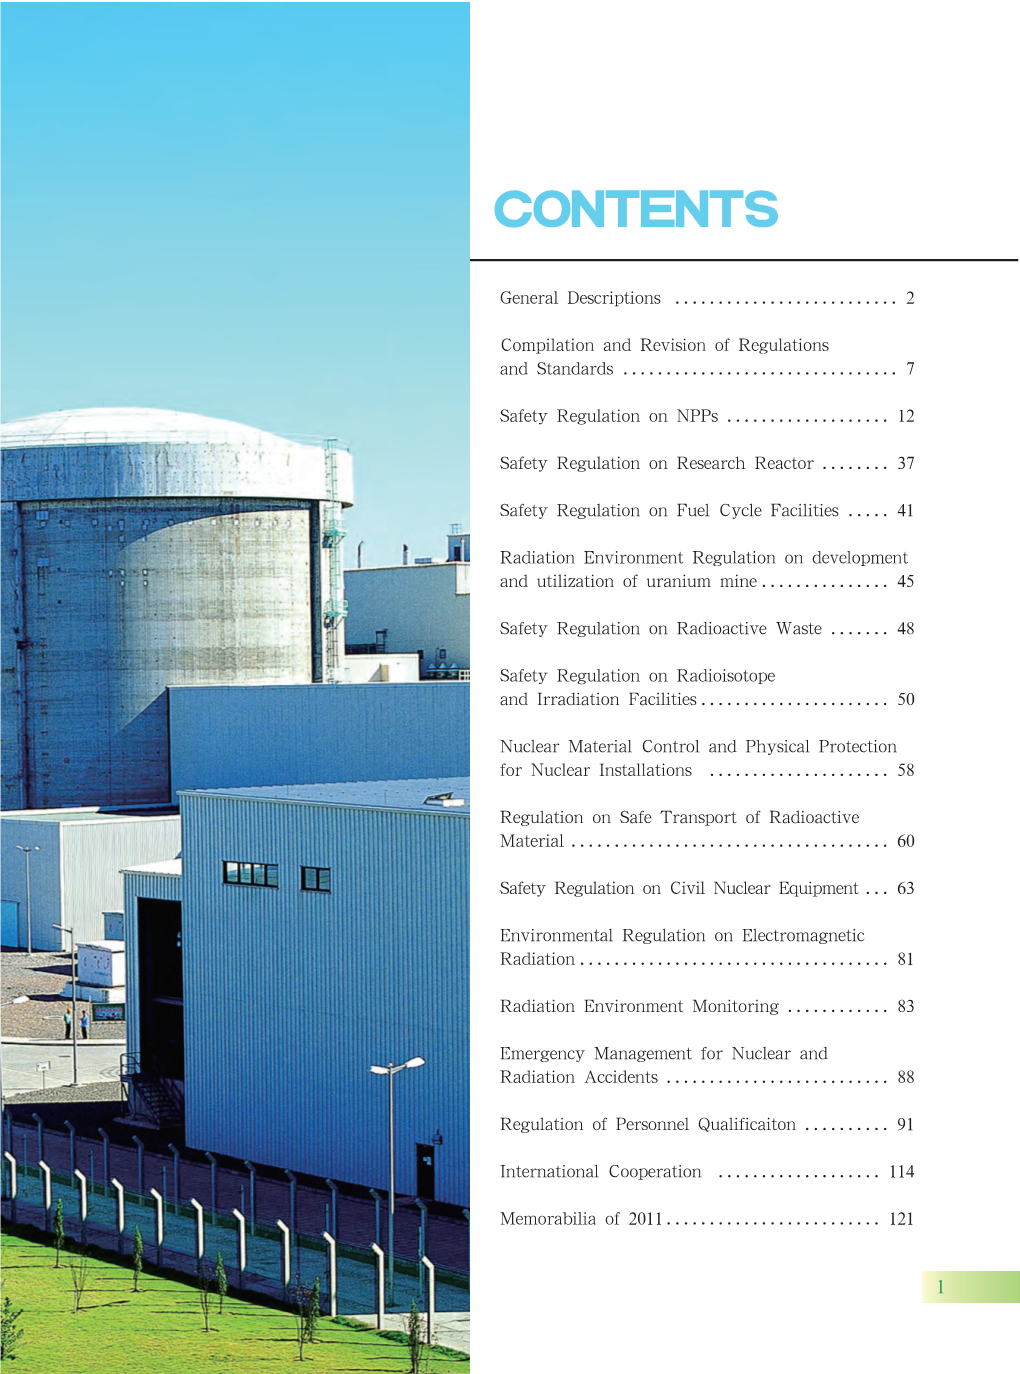 National Nuclear Safety Administration 2011 Annual Report